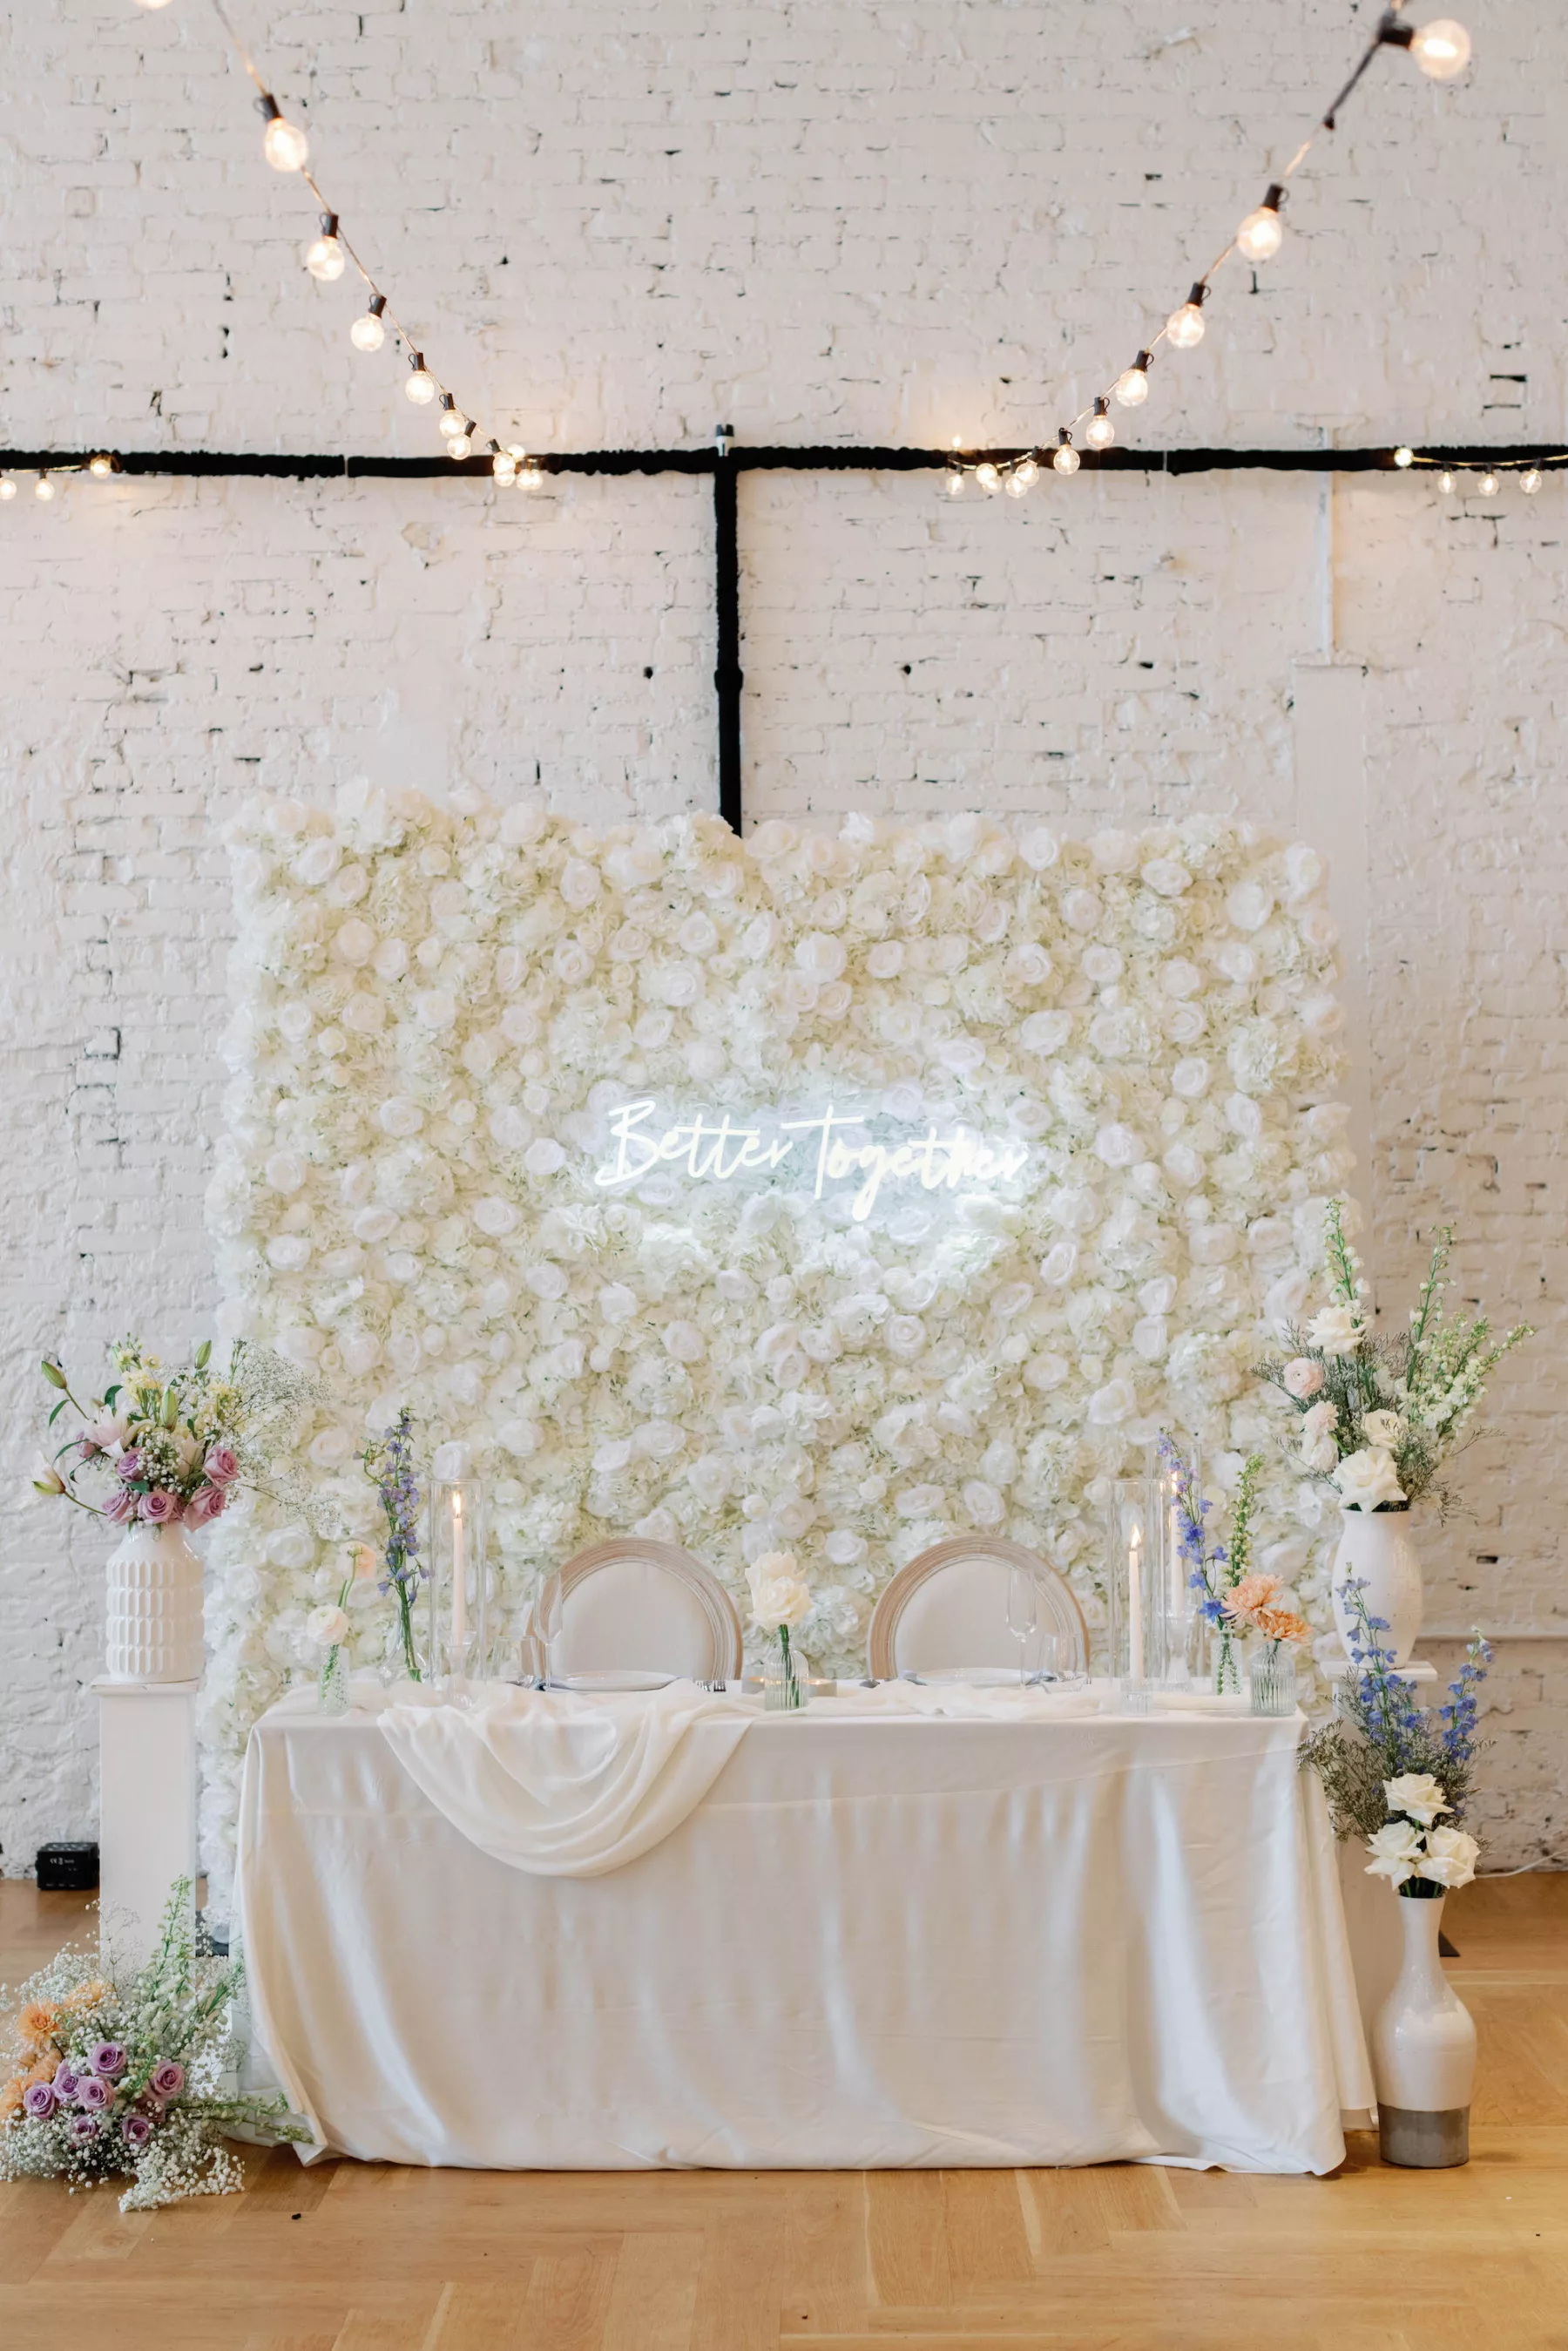 Whimsical Spring Wedding Reception Sweetheart Decor Ideas | White Rose Wall Backdrop Inspiration | Better Together Neon Sign | Blue and White Lily of the Valley, White Carnations, and Orange Chrysanthemums | Tampa Bay Event Planners Olive Tree Weddings | Event Venue Hotel Haya